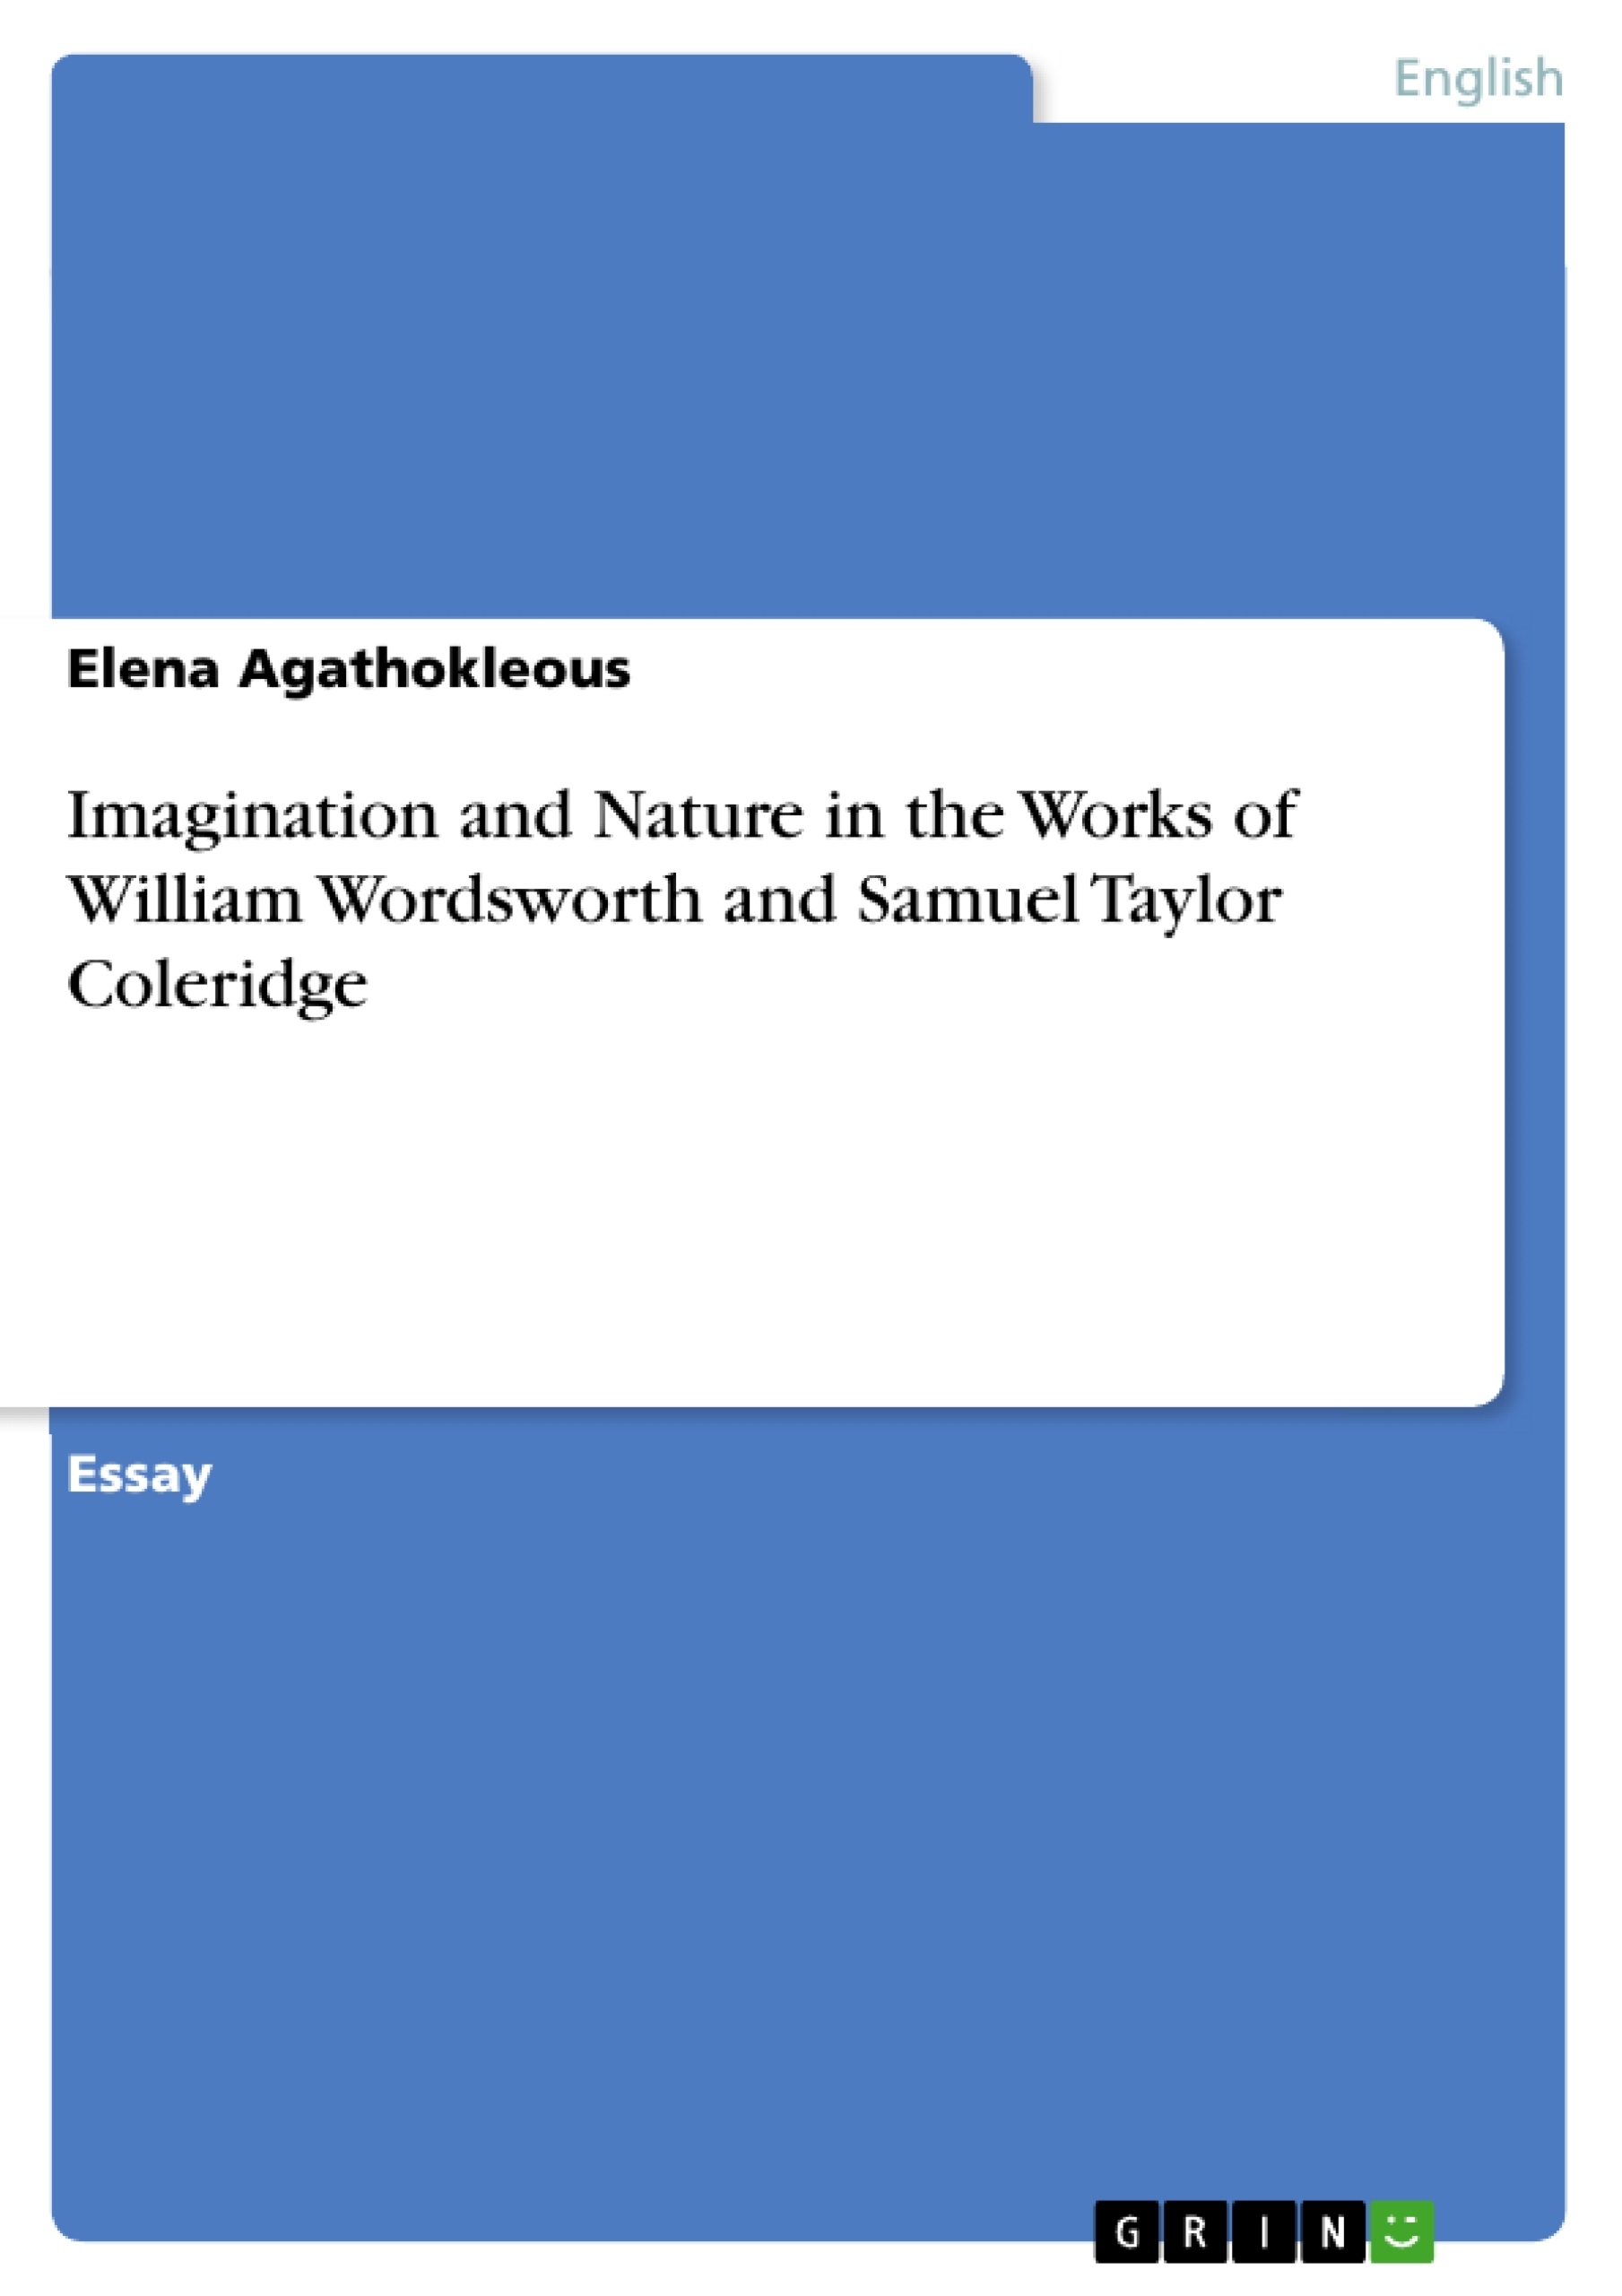 Title: Imagination and Nature in the Works of William Wordsworth and Samuel Taylor Coleridge